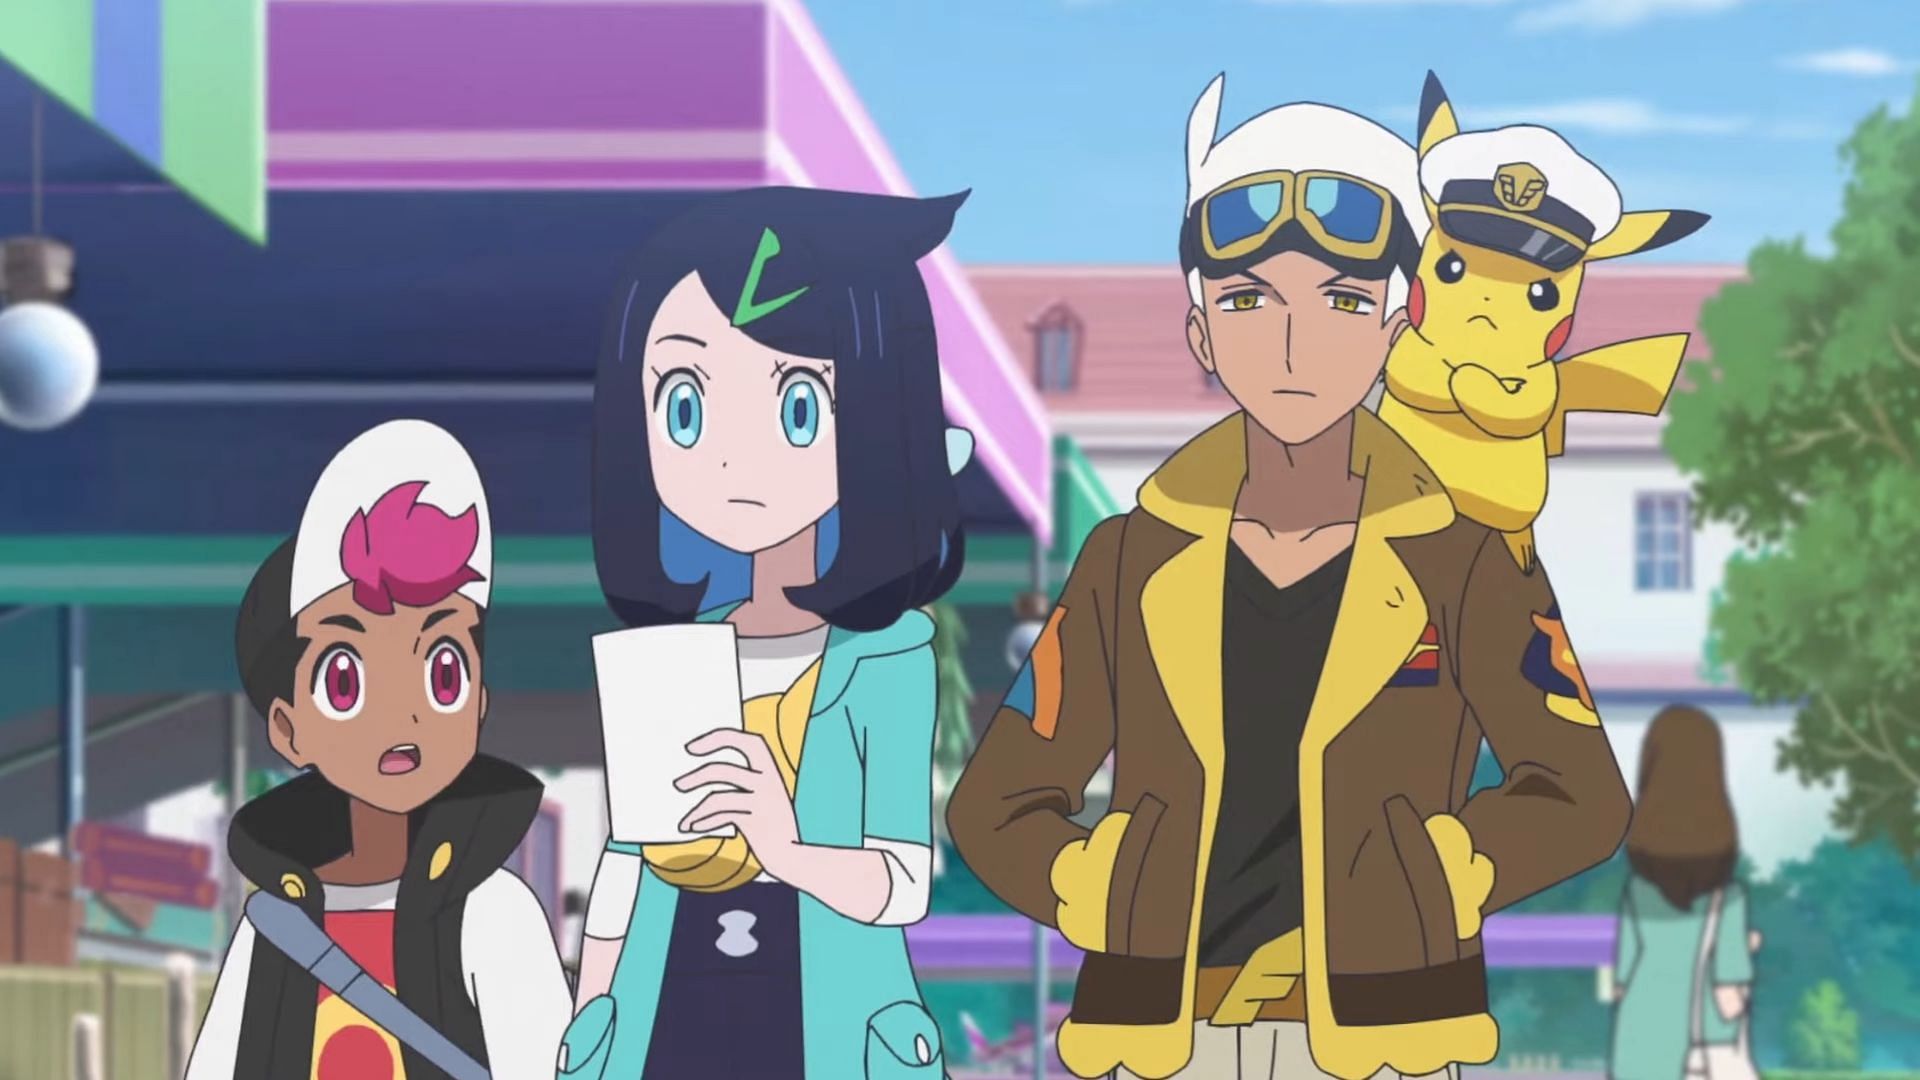 Liko, Roy, and Friede seek out Tepen&#039;s shop in Pokemon Horizons Episode 28 (Image via The Pokemon Company)